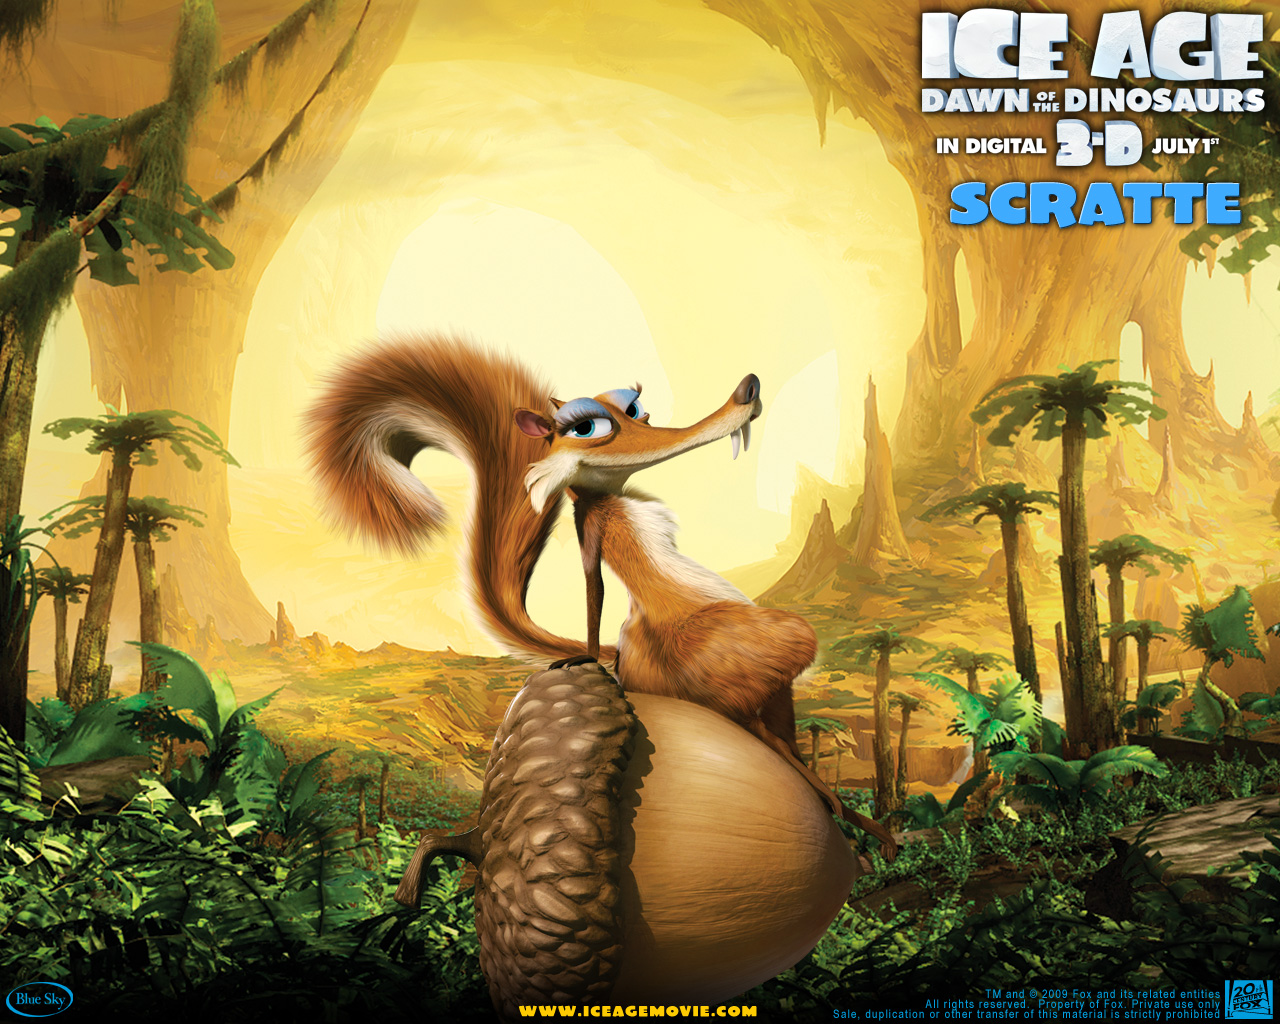 Download High quality Ice Age Dawn Of The Dinosaurs wallpaper / Cartoons / 1280x1024